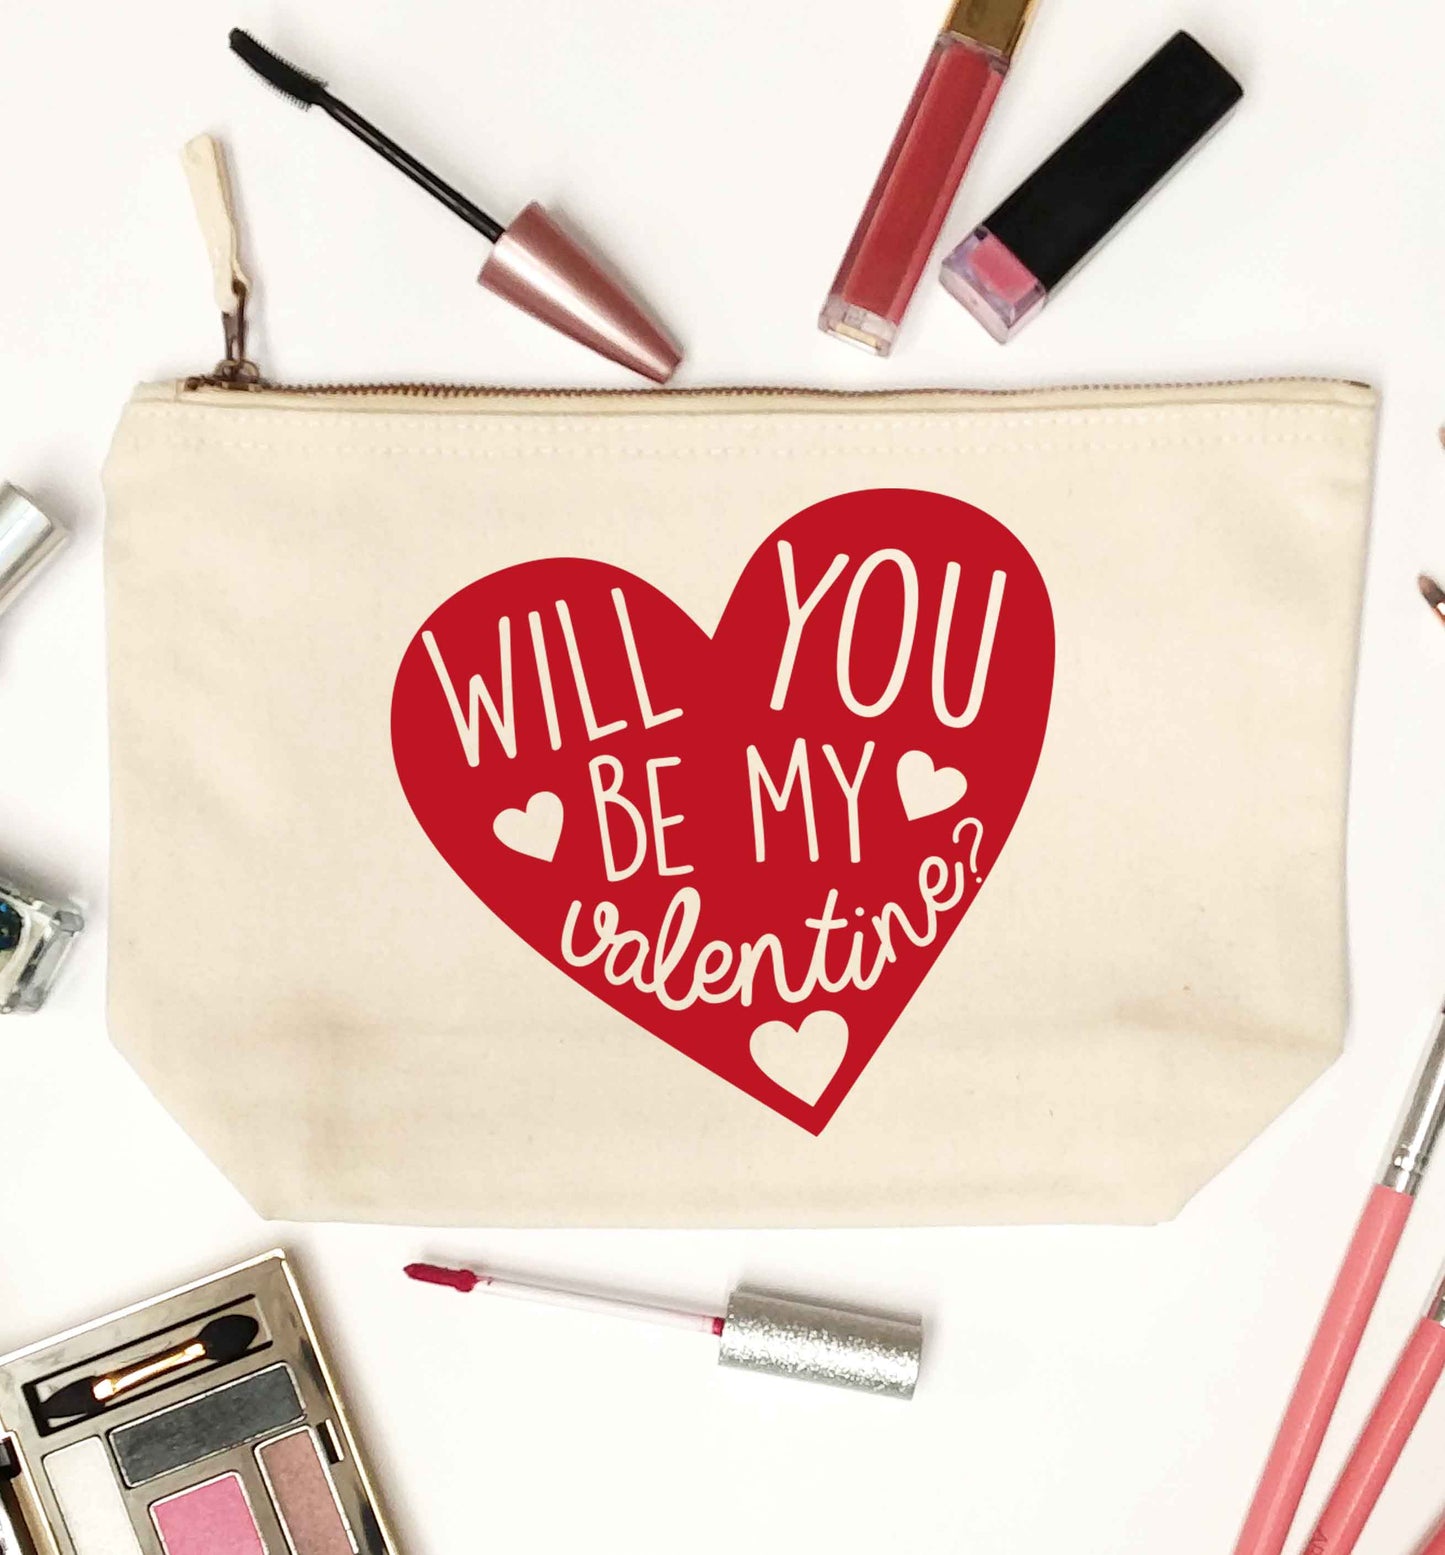 Will you be my valentine? natural makeup bag